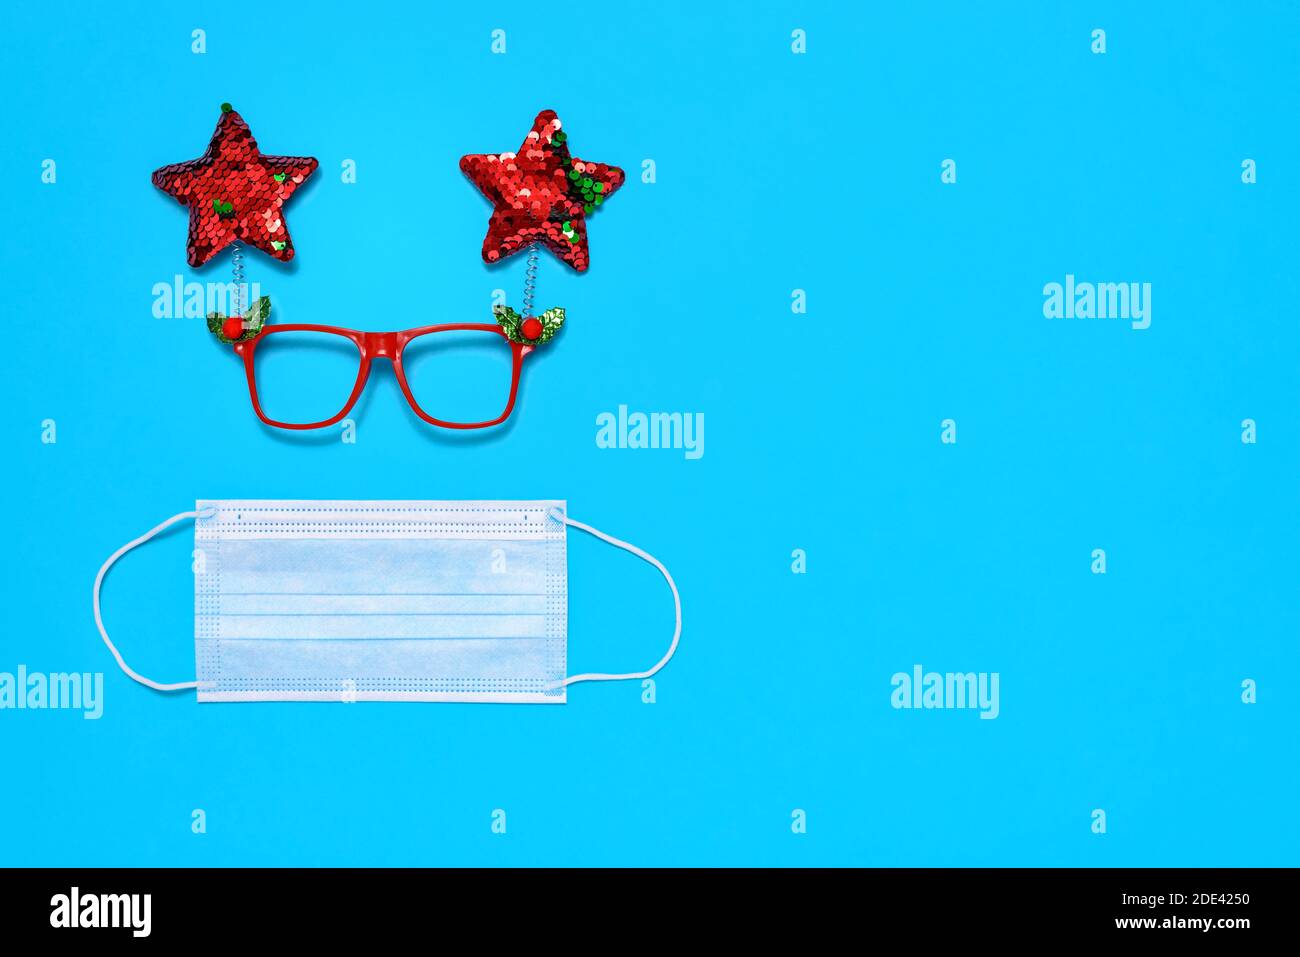 Medical mask and decorative Christmas glasses on blue background. The concept of celebrating the New Year and Christmas during the COVID-19 epidemic. Stock Photo